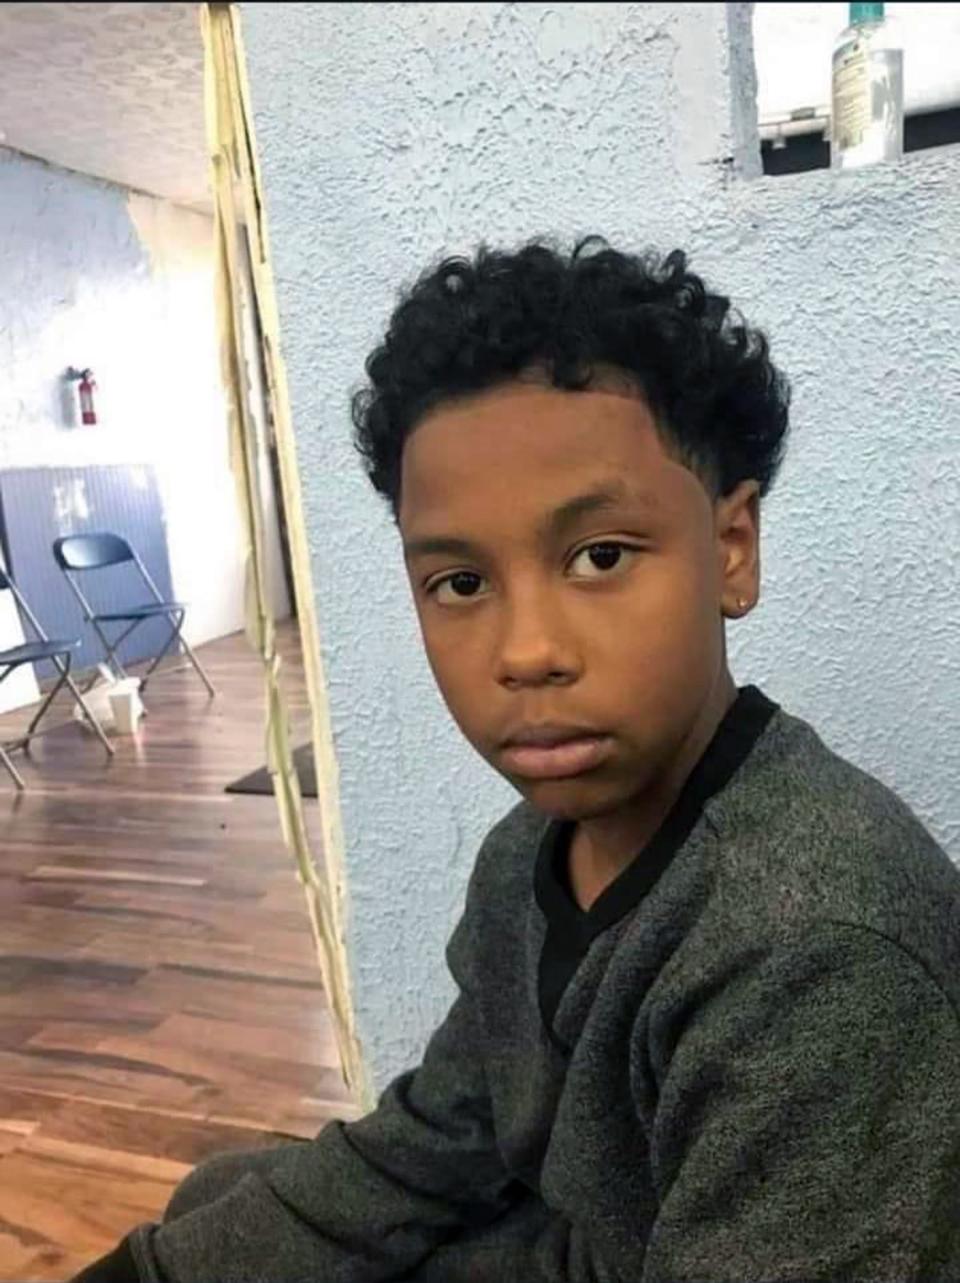 Sinzae Reed, a 13-year-old who was fatally shot earlier this month in the Hilltop neighborhood. His sister 20-year-old Makayla Nichols said Sinzae was a good kid who didn't deserve to die.